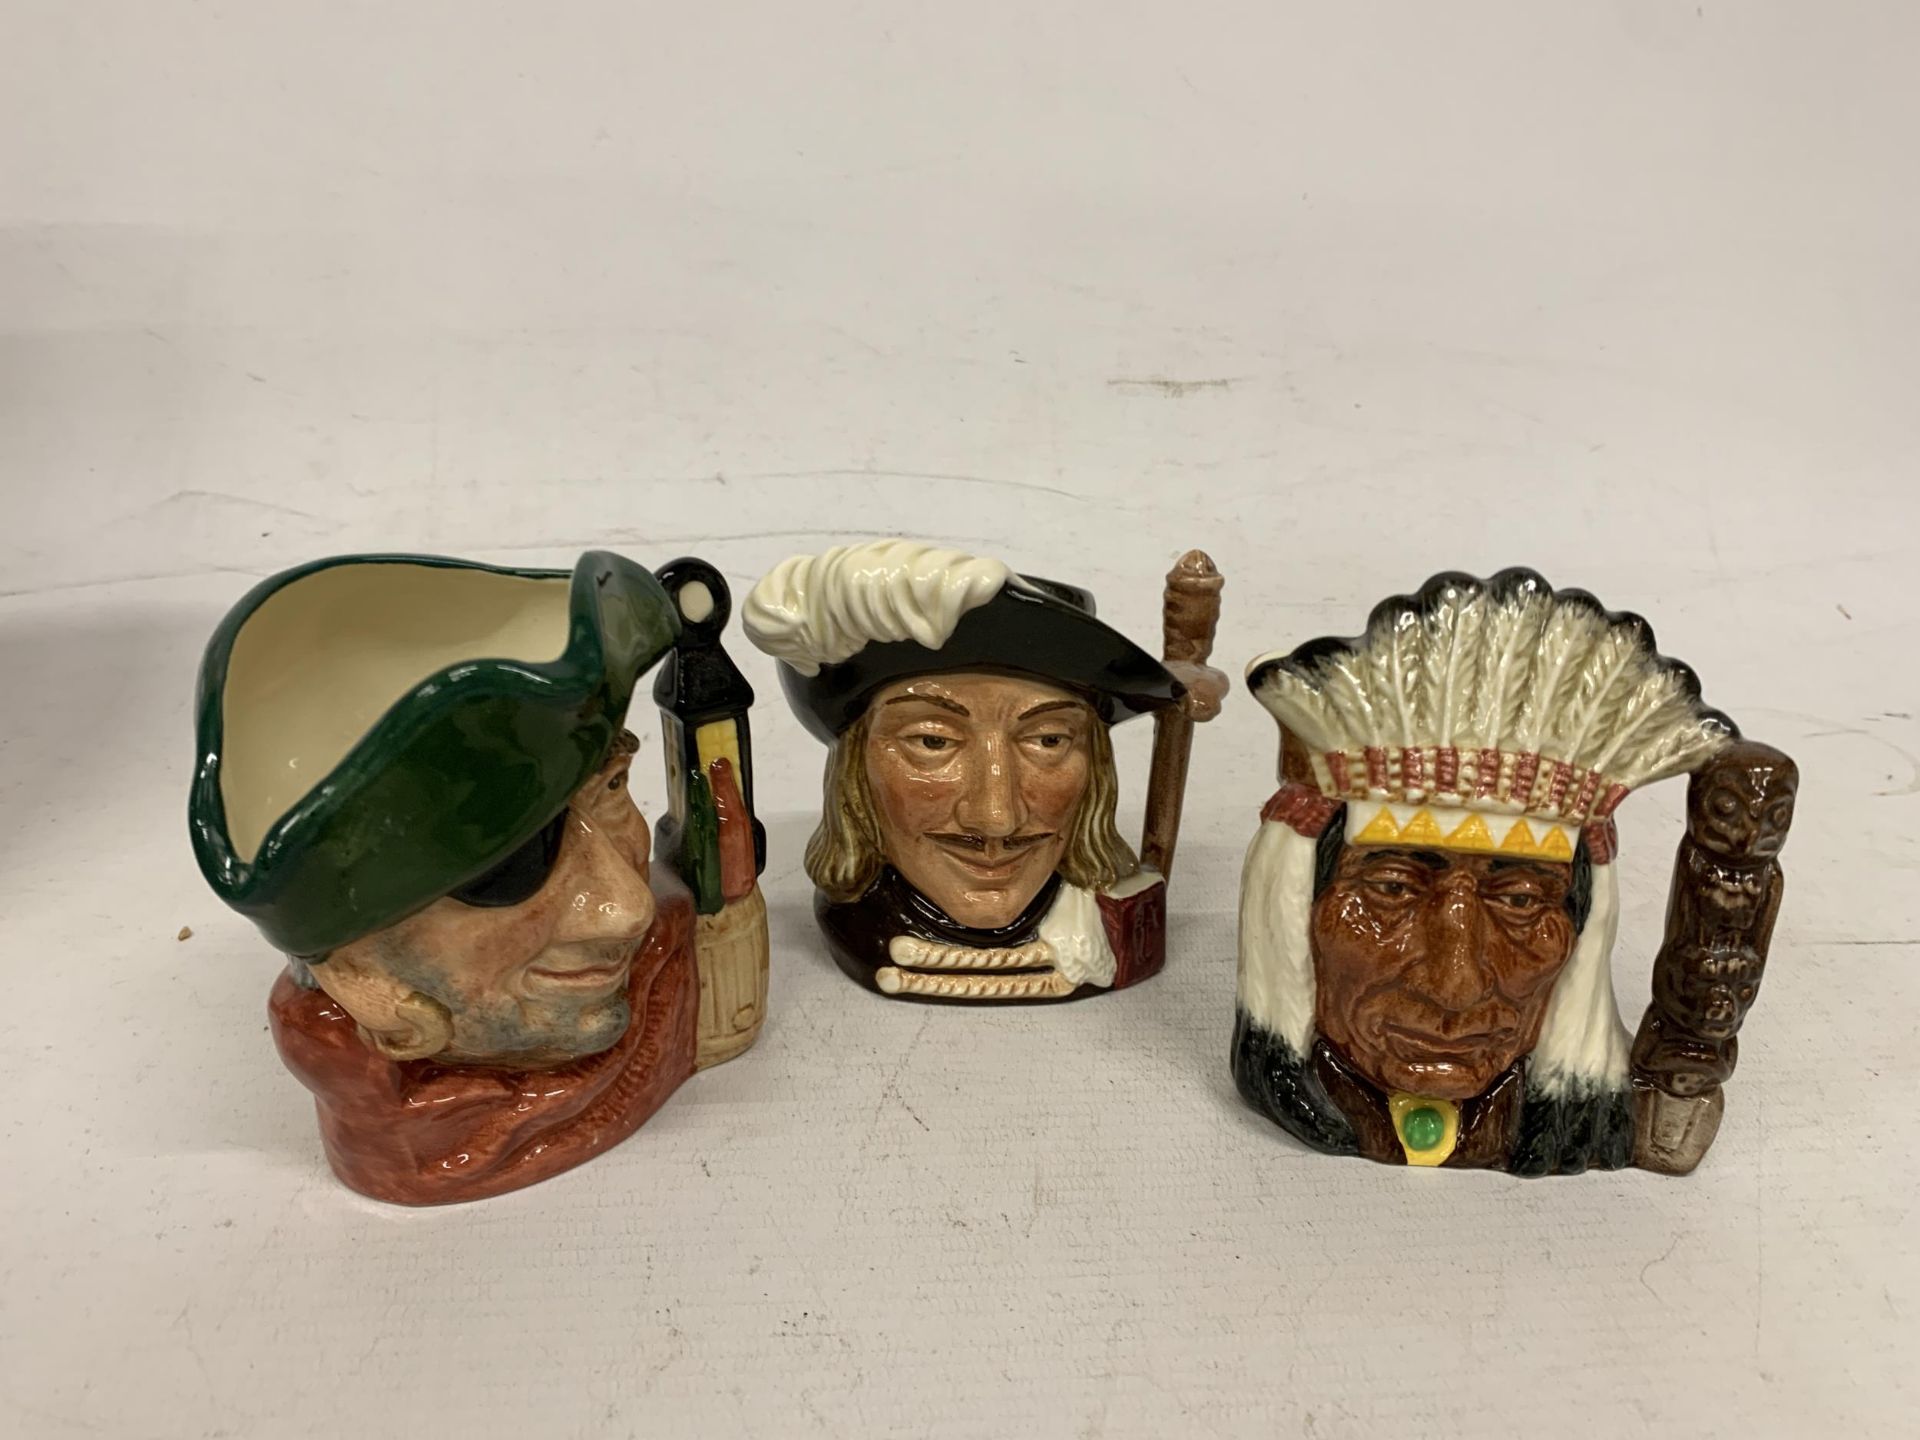 THREE ROYAL DOULTON TOBY JUGS TO INCLUDE THE SMUGGLER,NORTH AMERICAN INDIAN AND ARAMIS